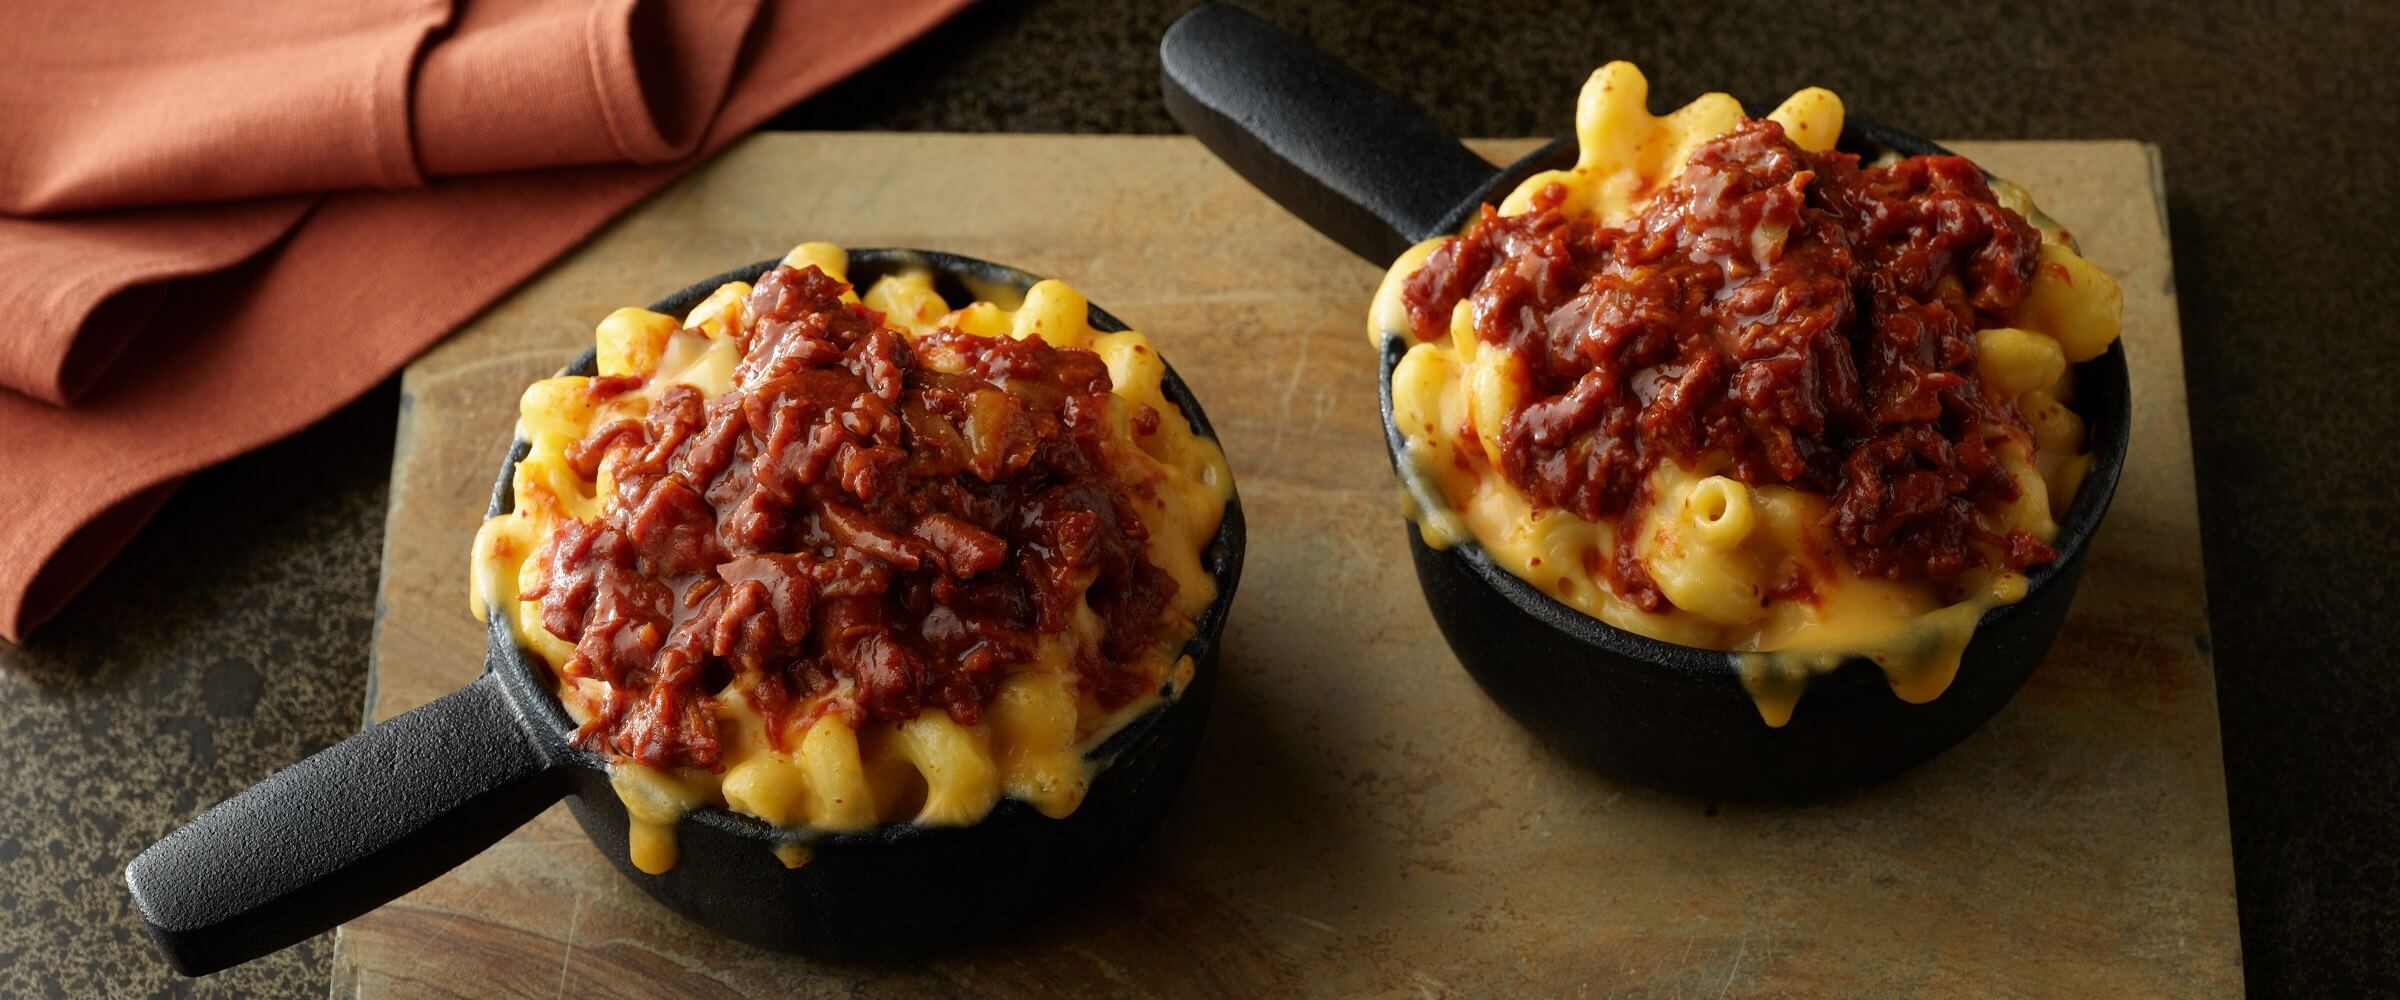 BBQ pulled pork mac and cheese in mini black skillet on a wood board